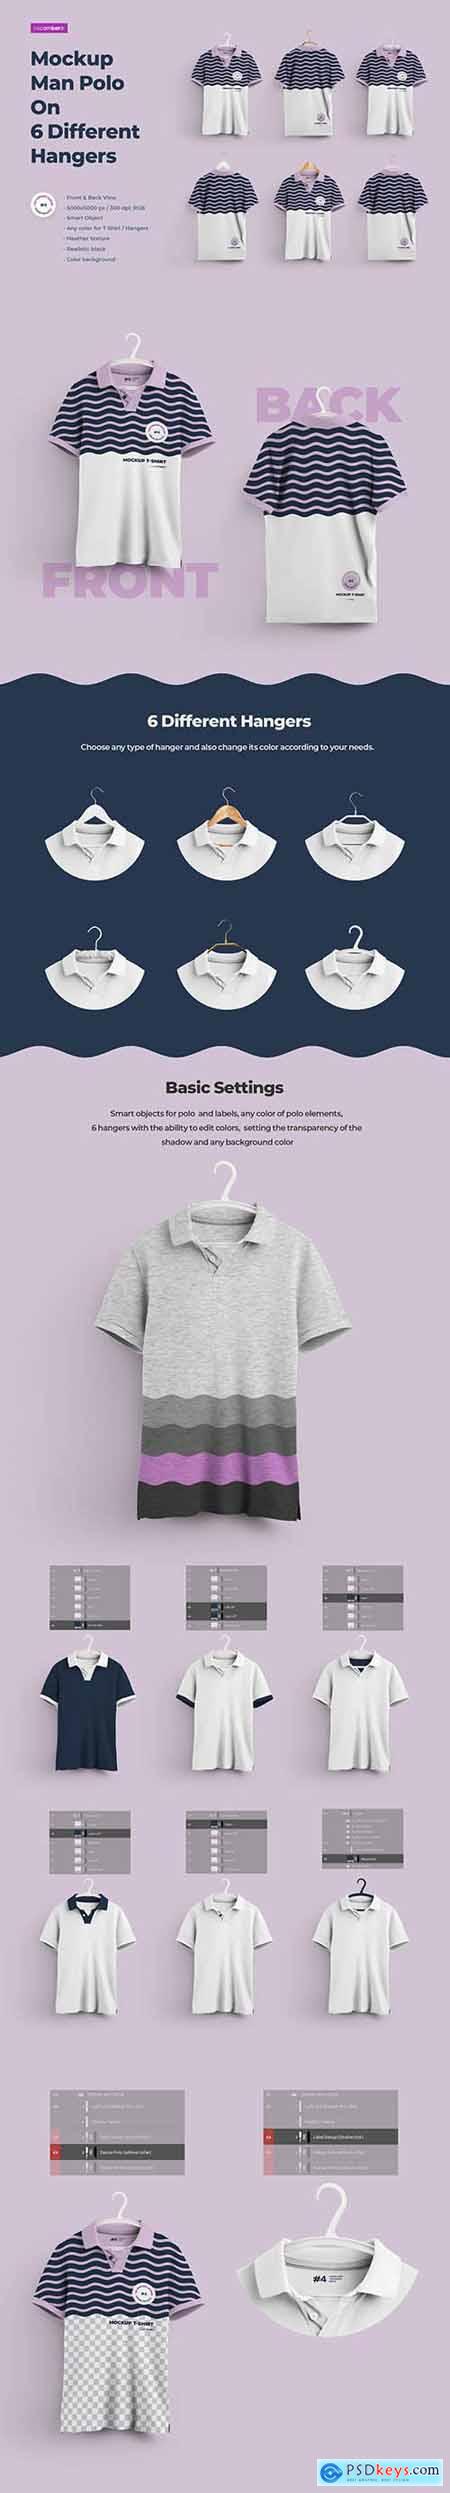 2 Mockups Man Polo On 6 Different Hangers